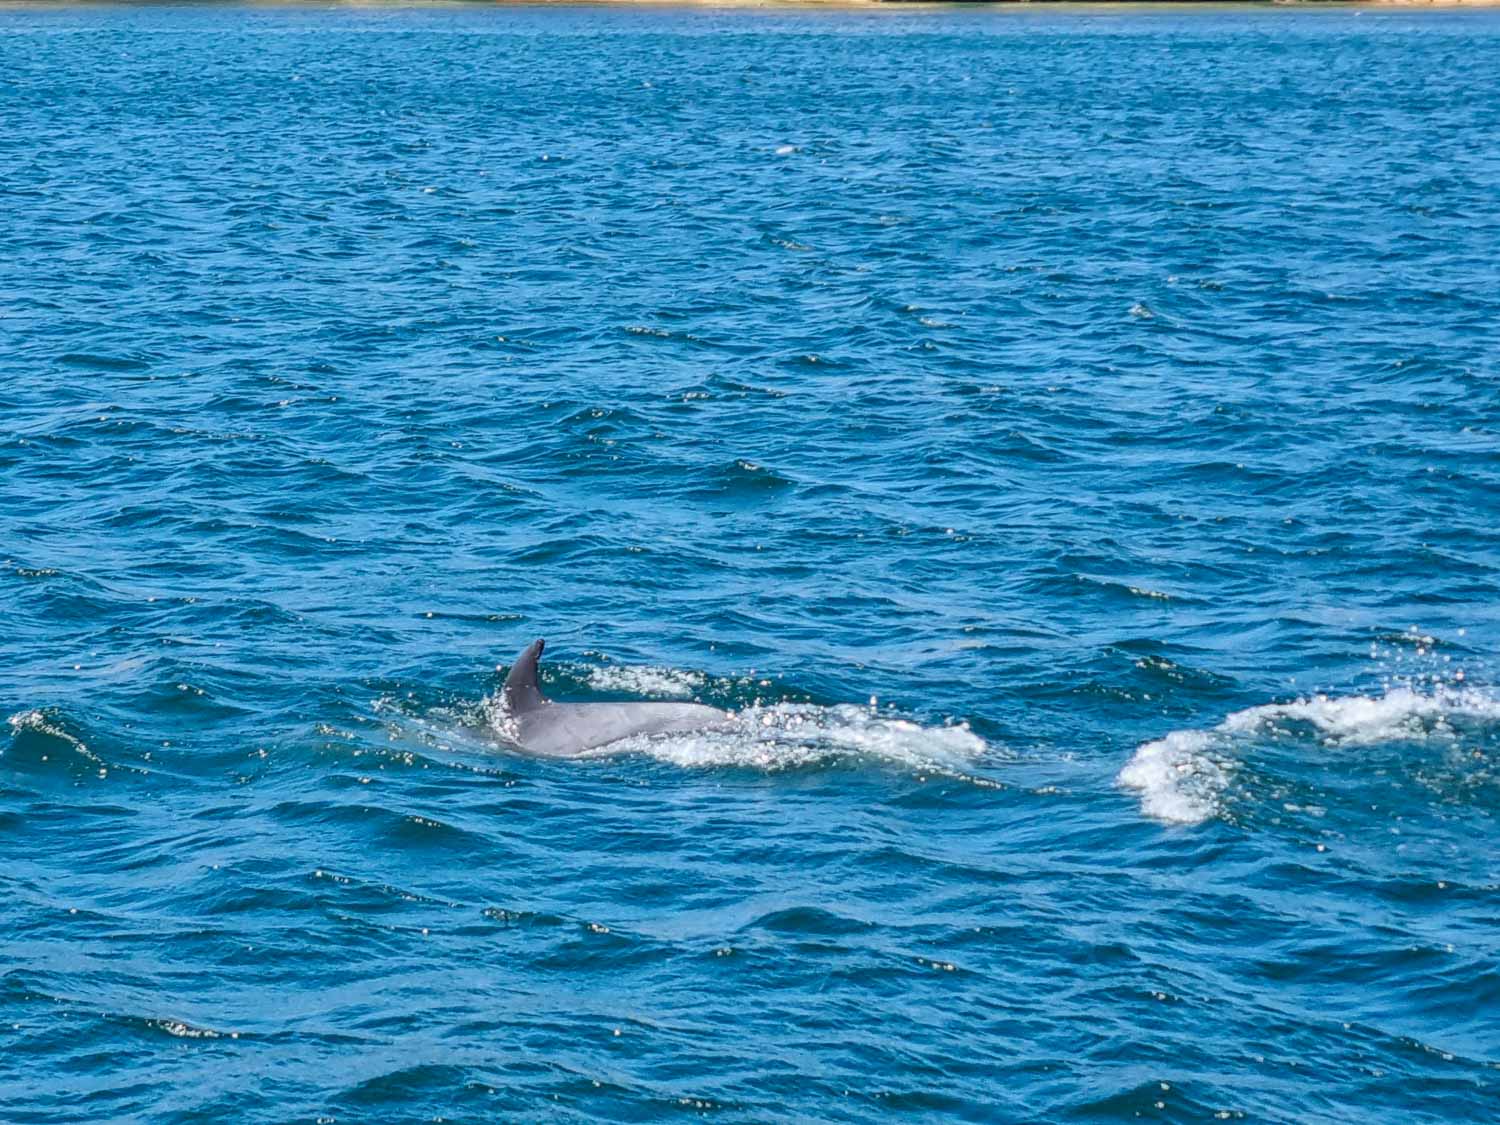 Dolphin just seen in the waves on a boat trip from Lagos with kids